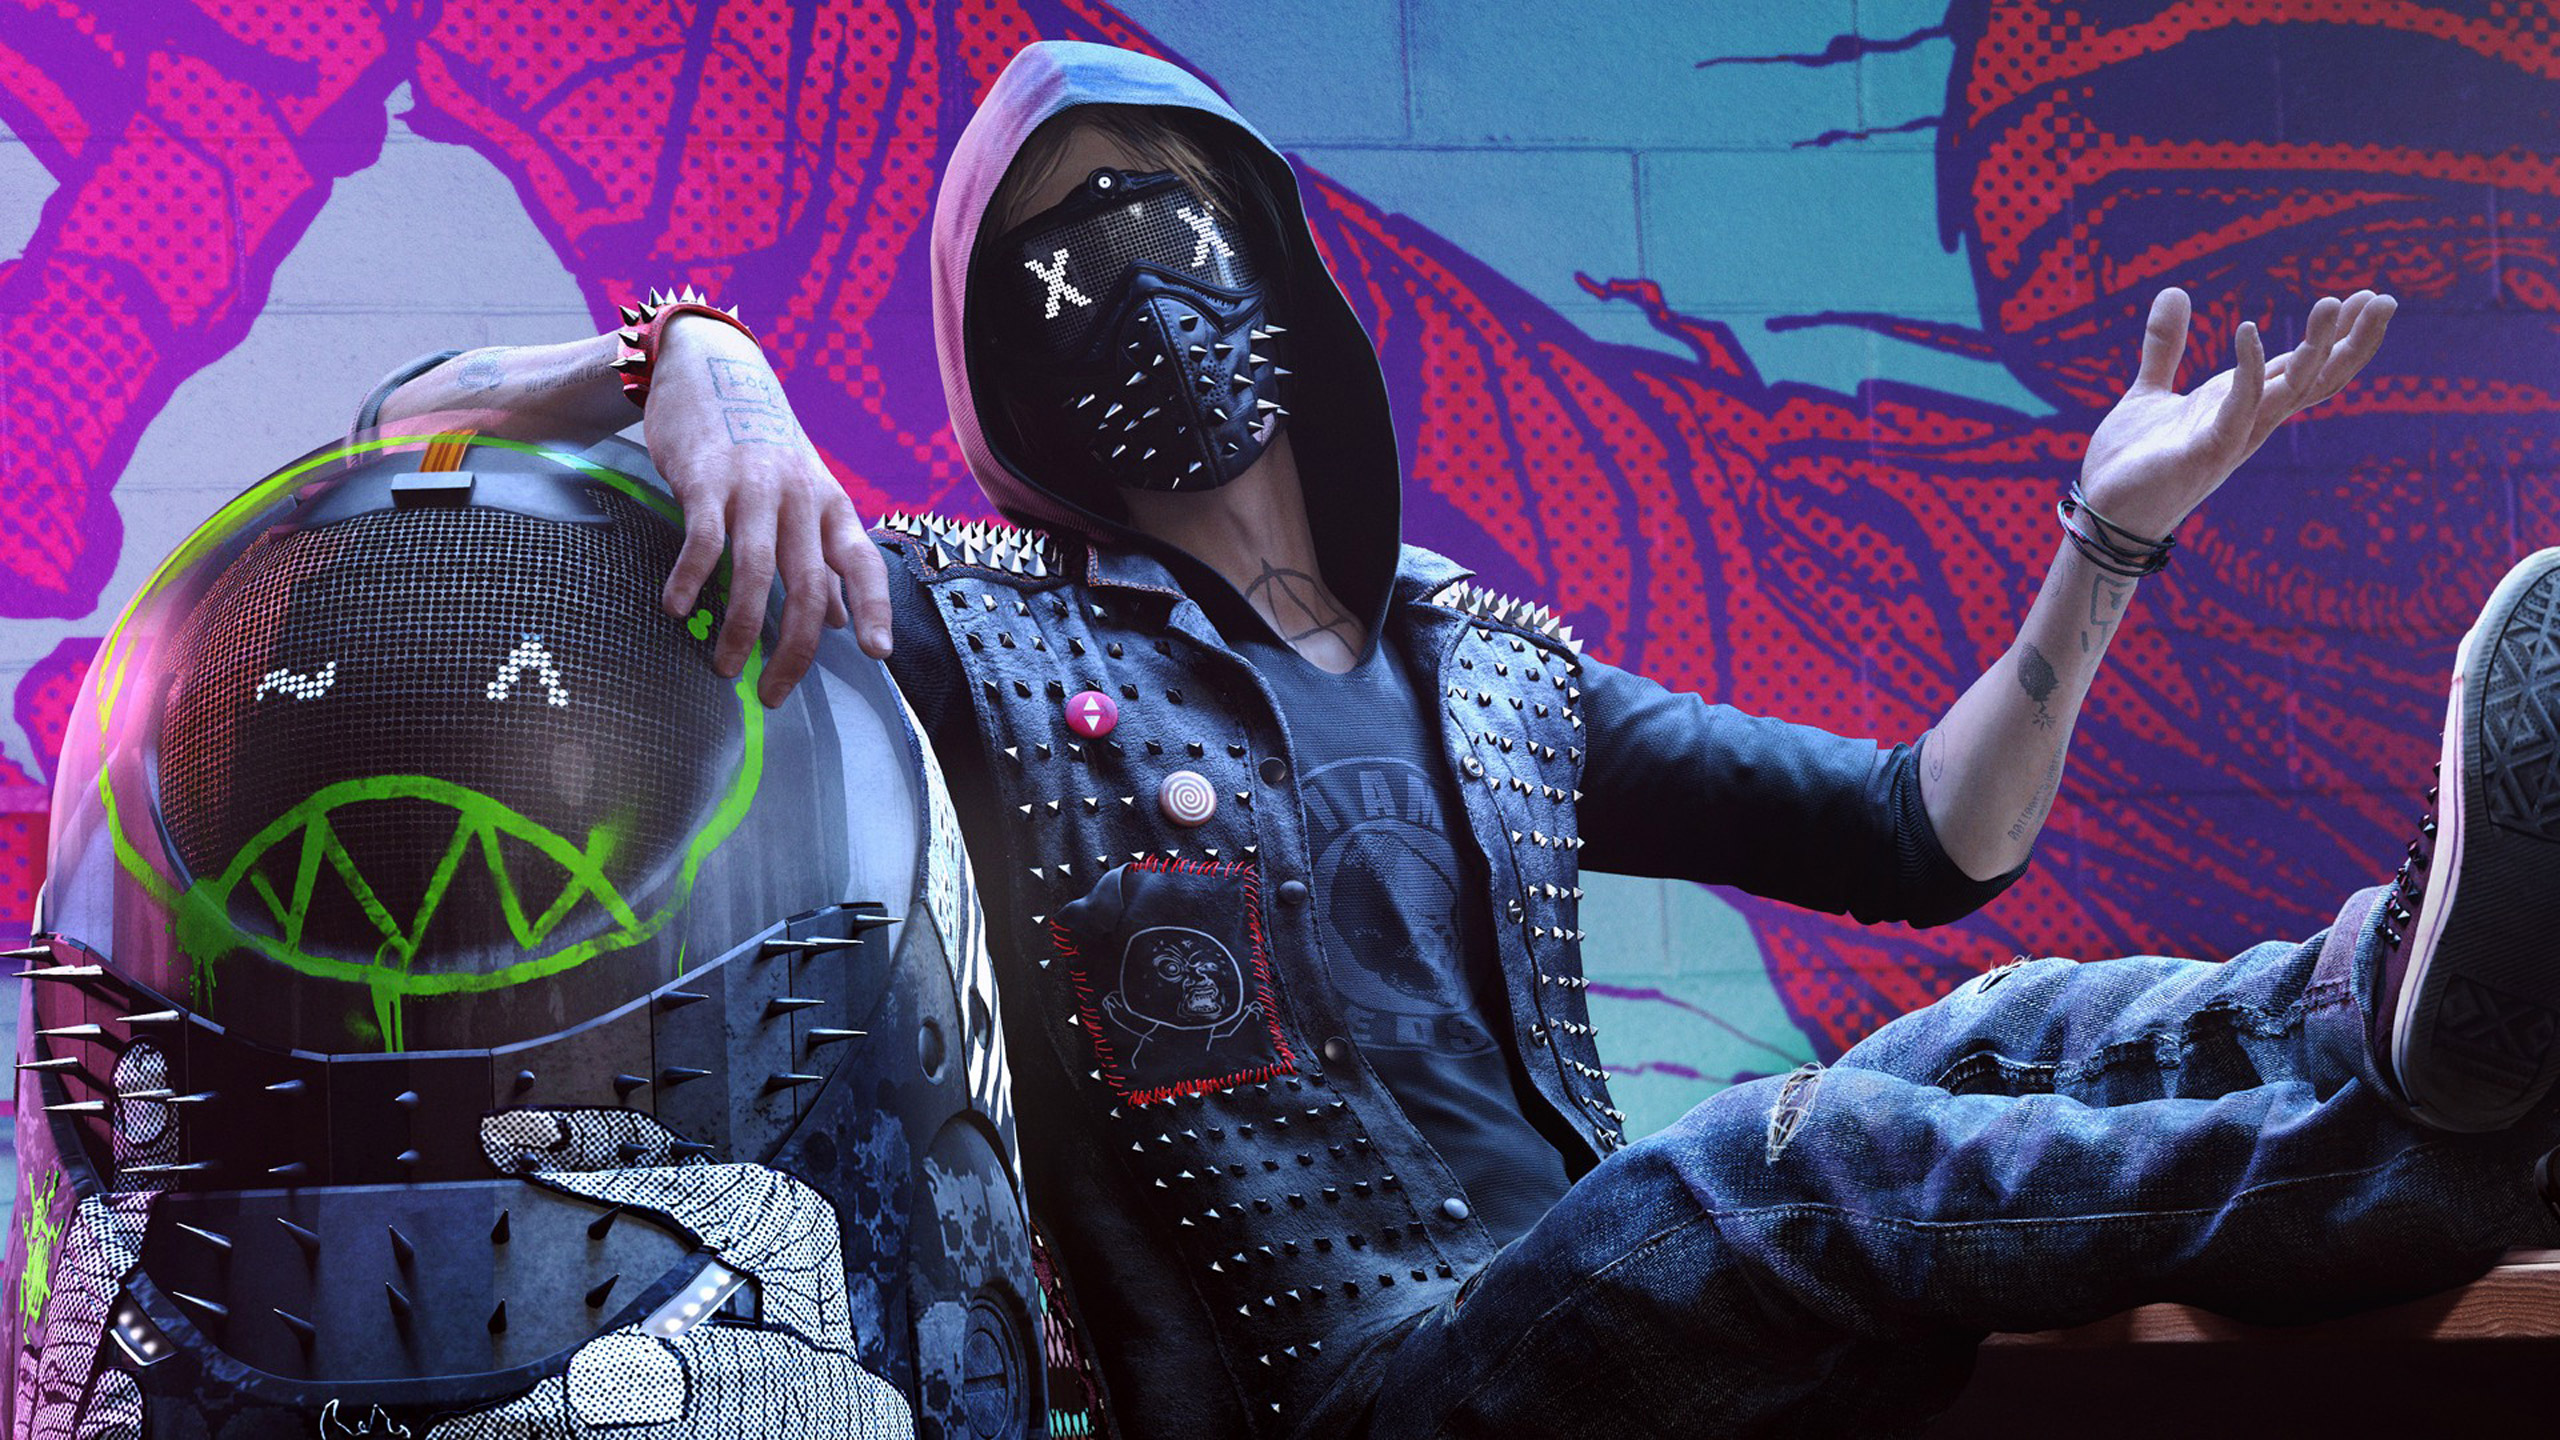 Wrench Watch Dogs 2 Wallpapers | Wallpapers HD